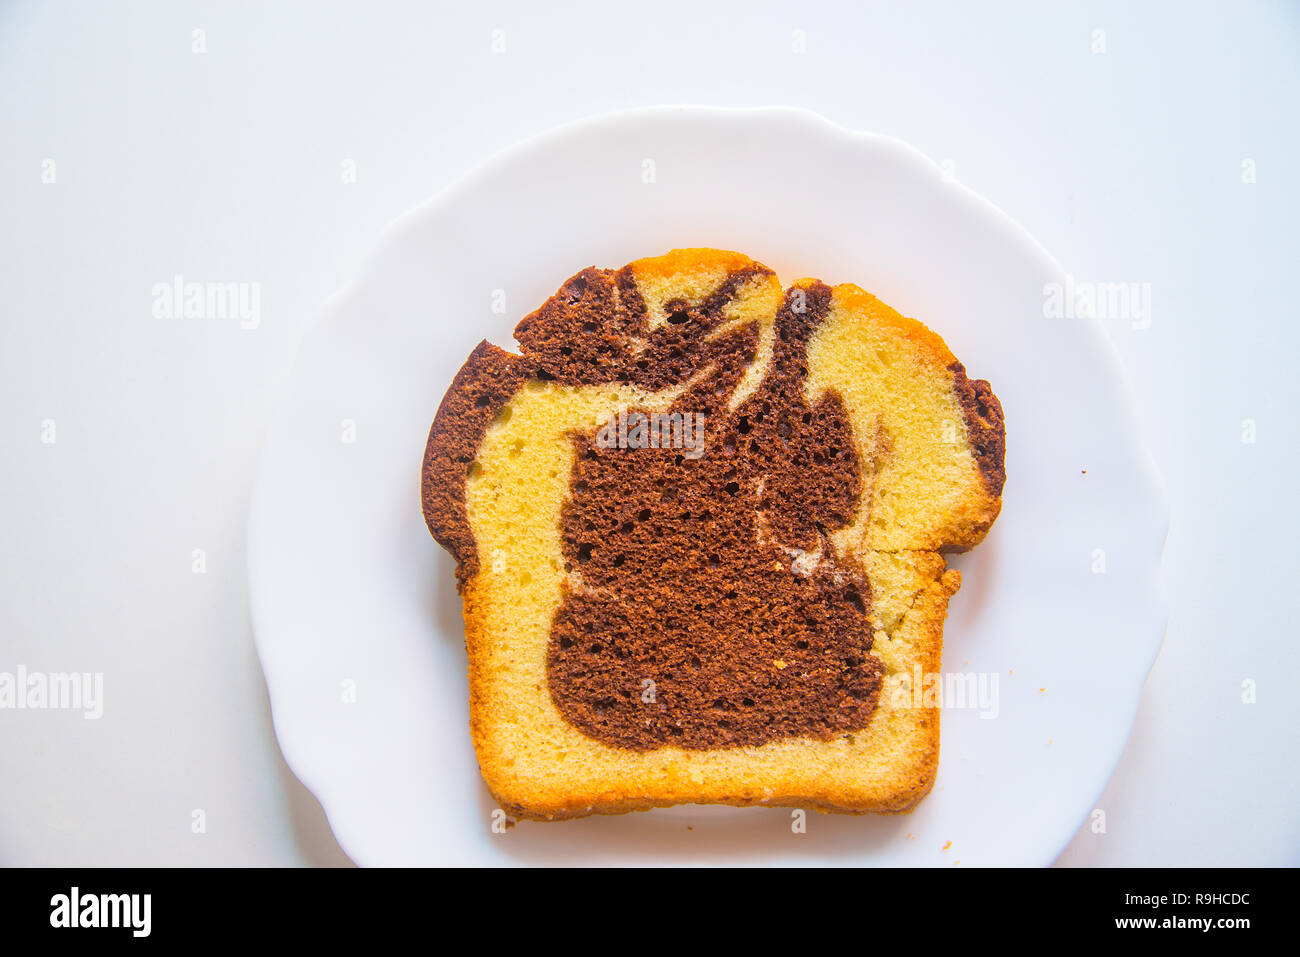 Piece of sponge cake on a dish. View from above. Stock Photo